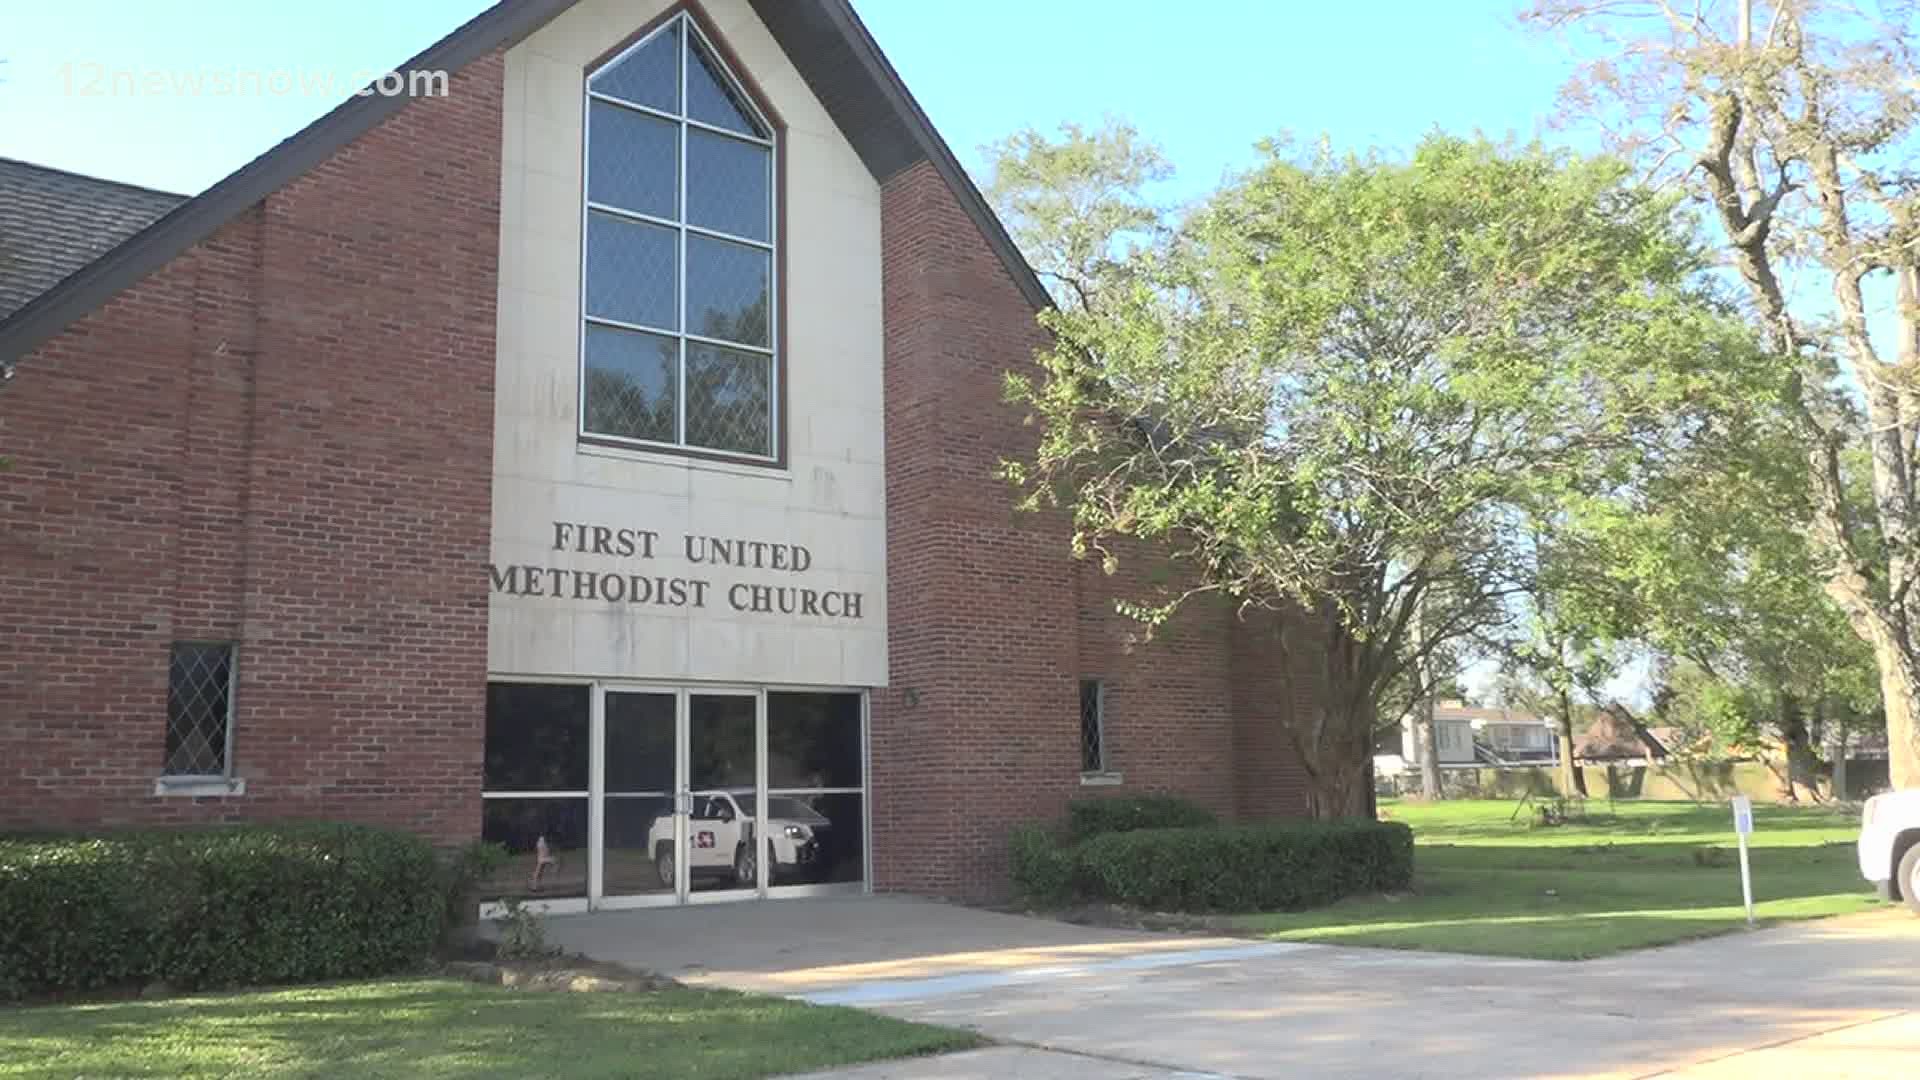 For more then 50 years the sound of the bells from First United Methodist Church Groves have floated across this small Southeast Texas town.